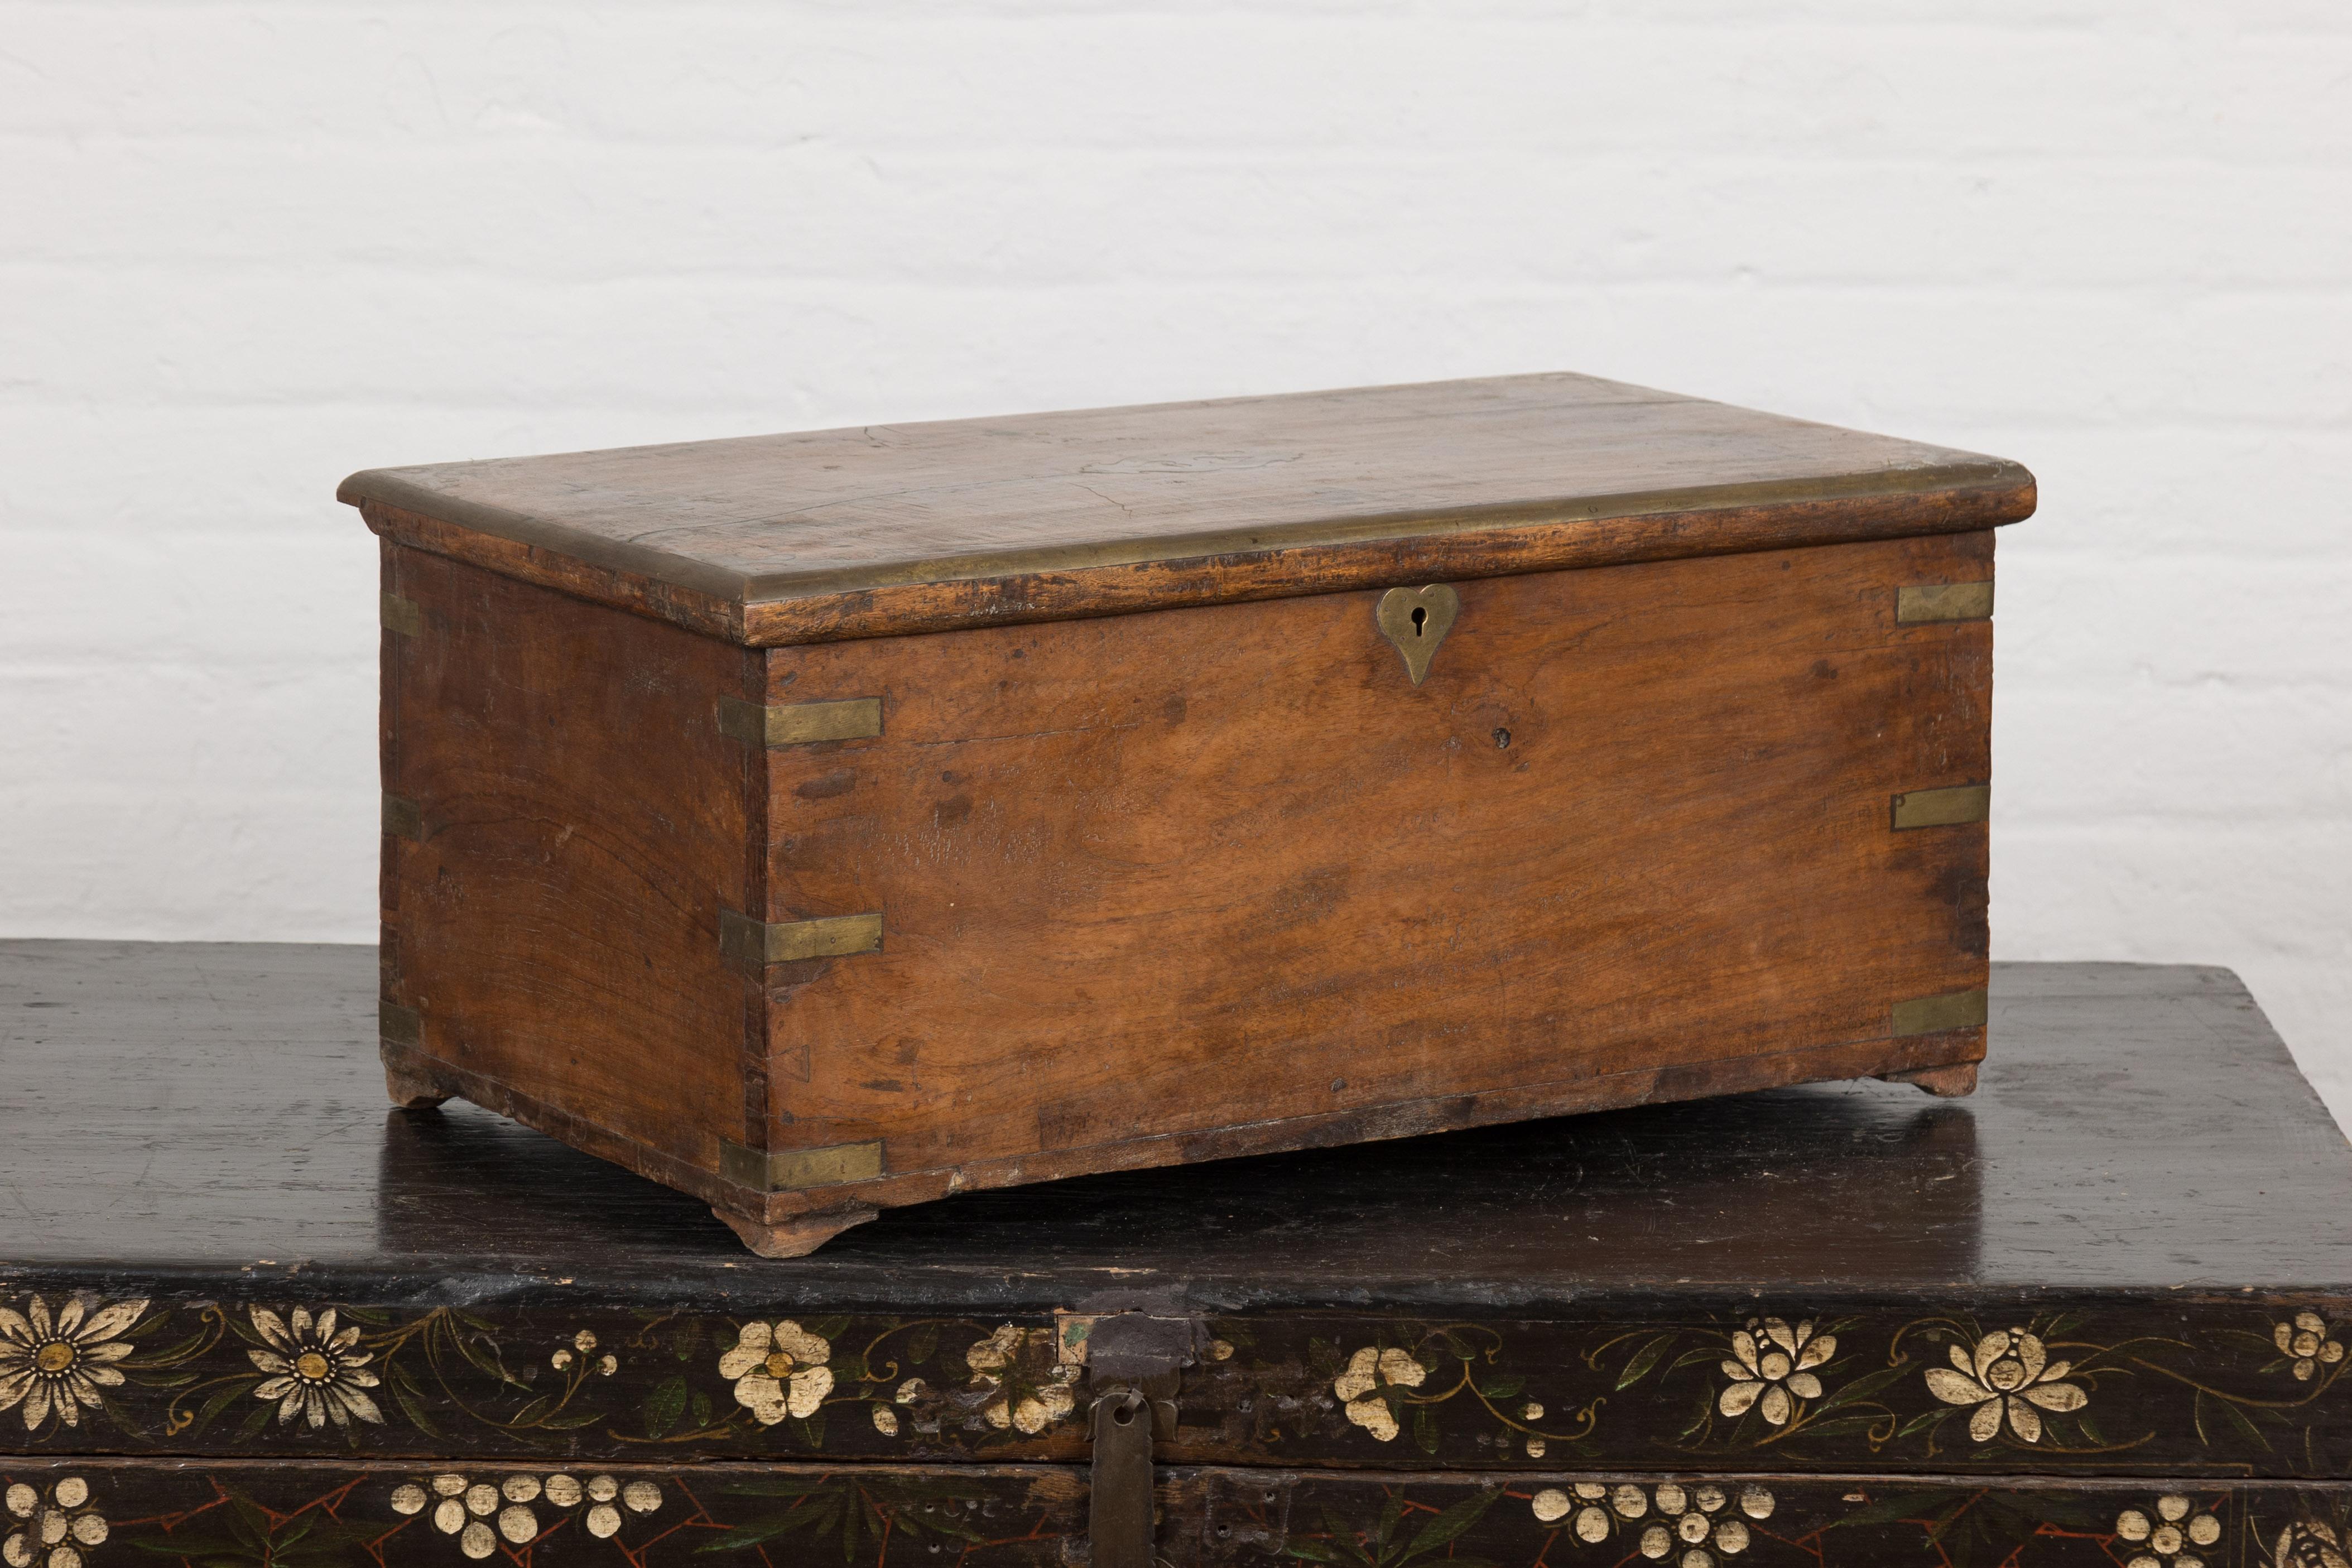 An old Indonesian wooden box from the 19th century with inlaid brass details, partitioned interior and rustic character. Caressing the annals of time with rustic elegance, this old Indonesian wooden box from the 19th century weaves tales of ancient